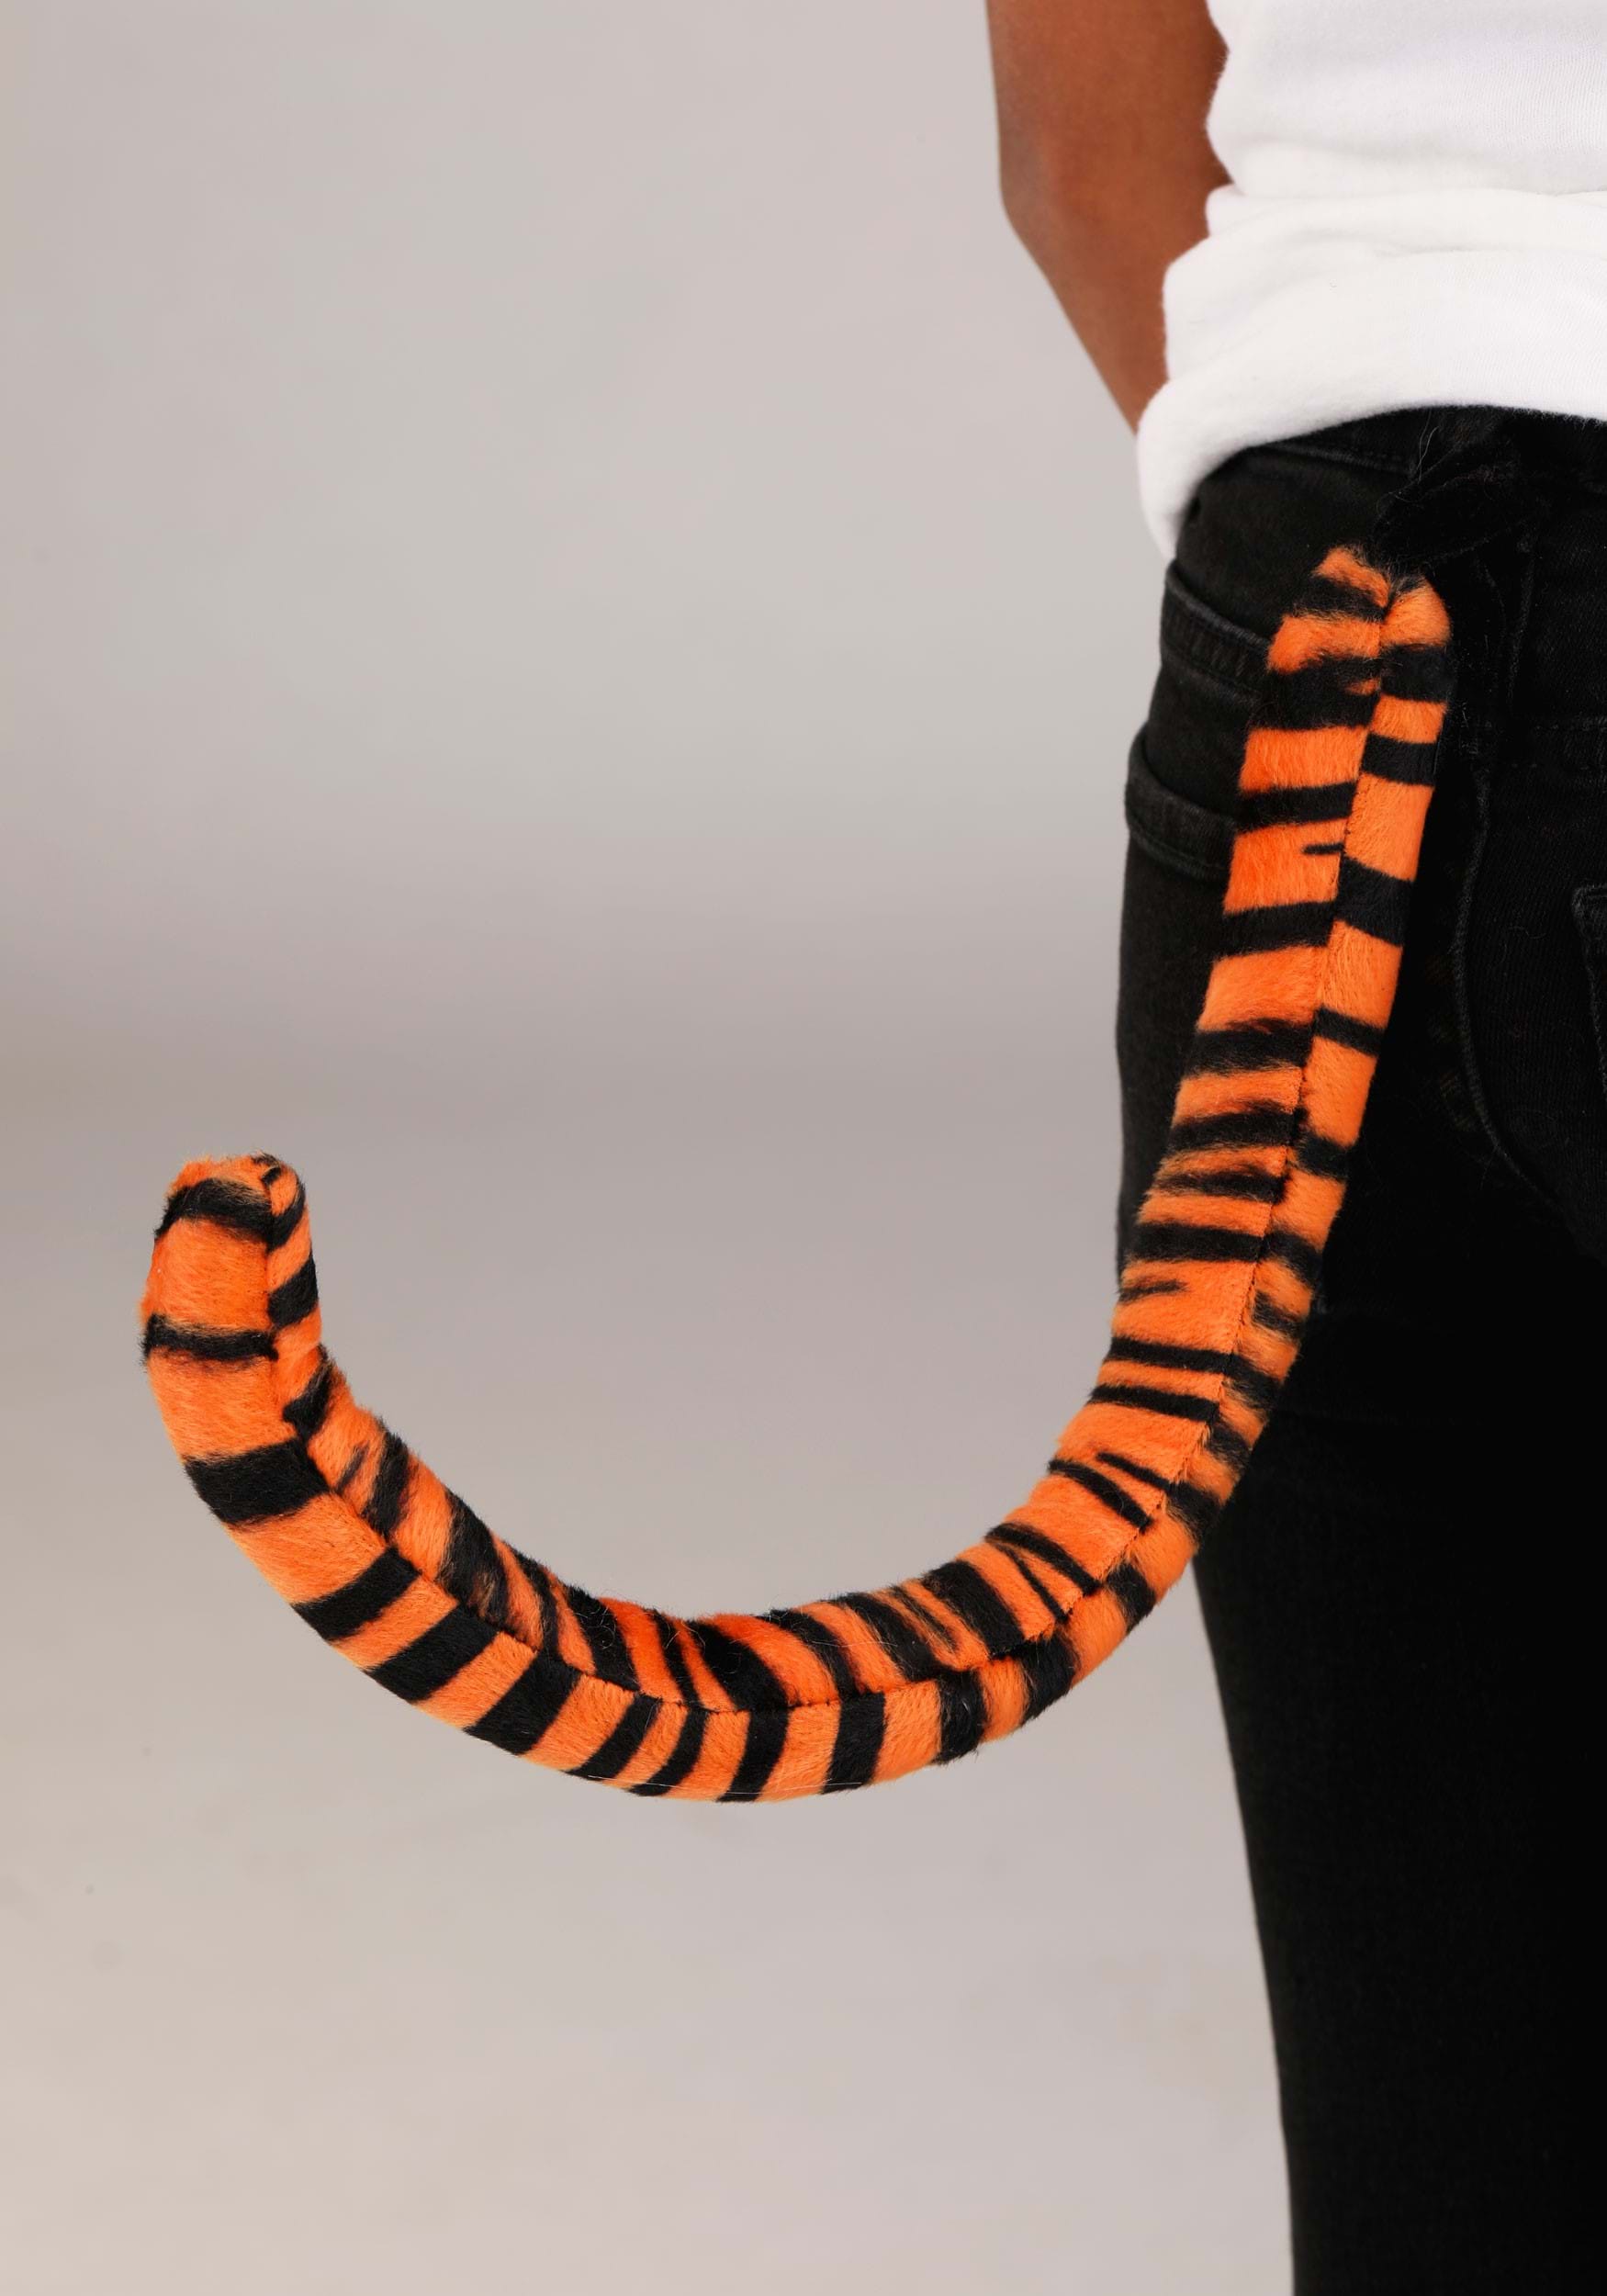 Tiger Ears And Tail Fancy Dress Costume Set